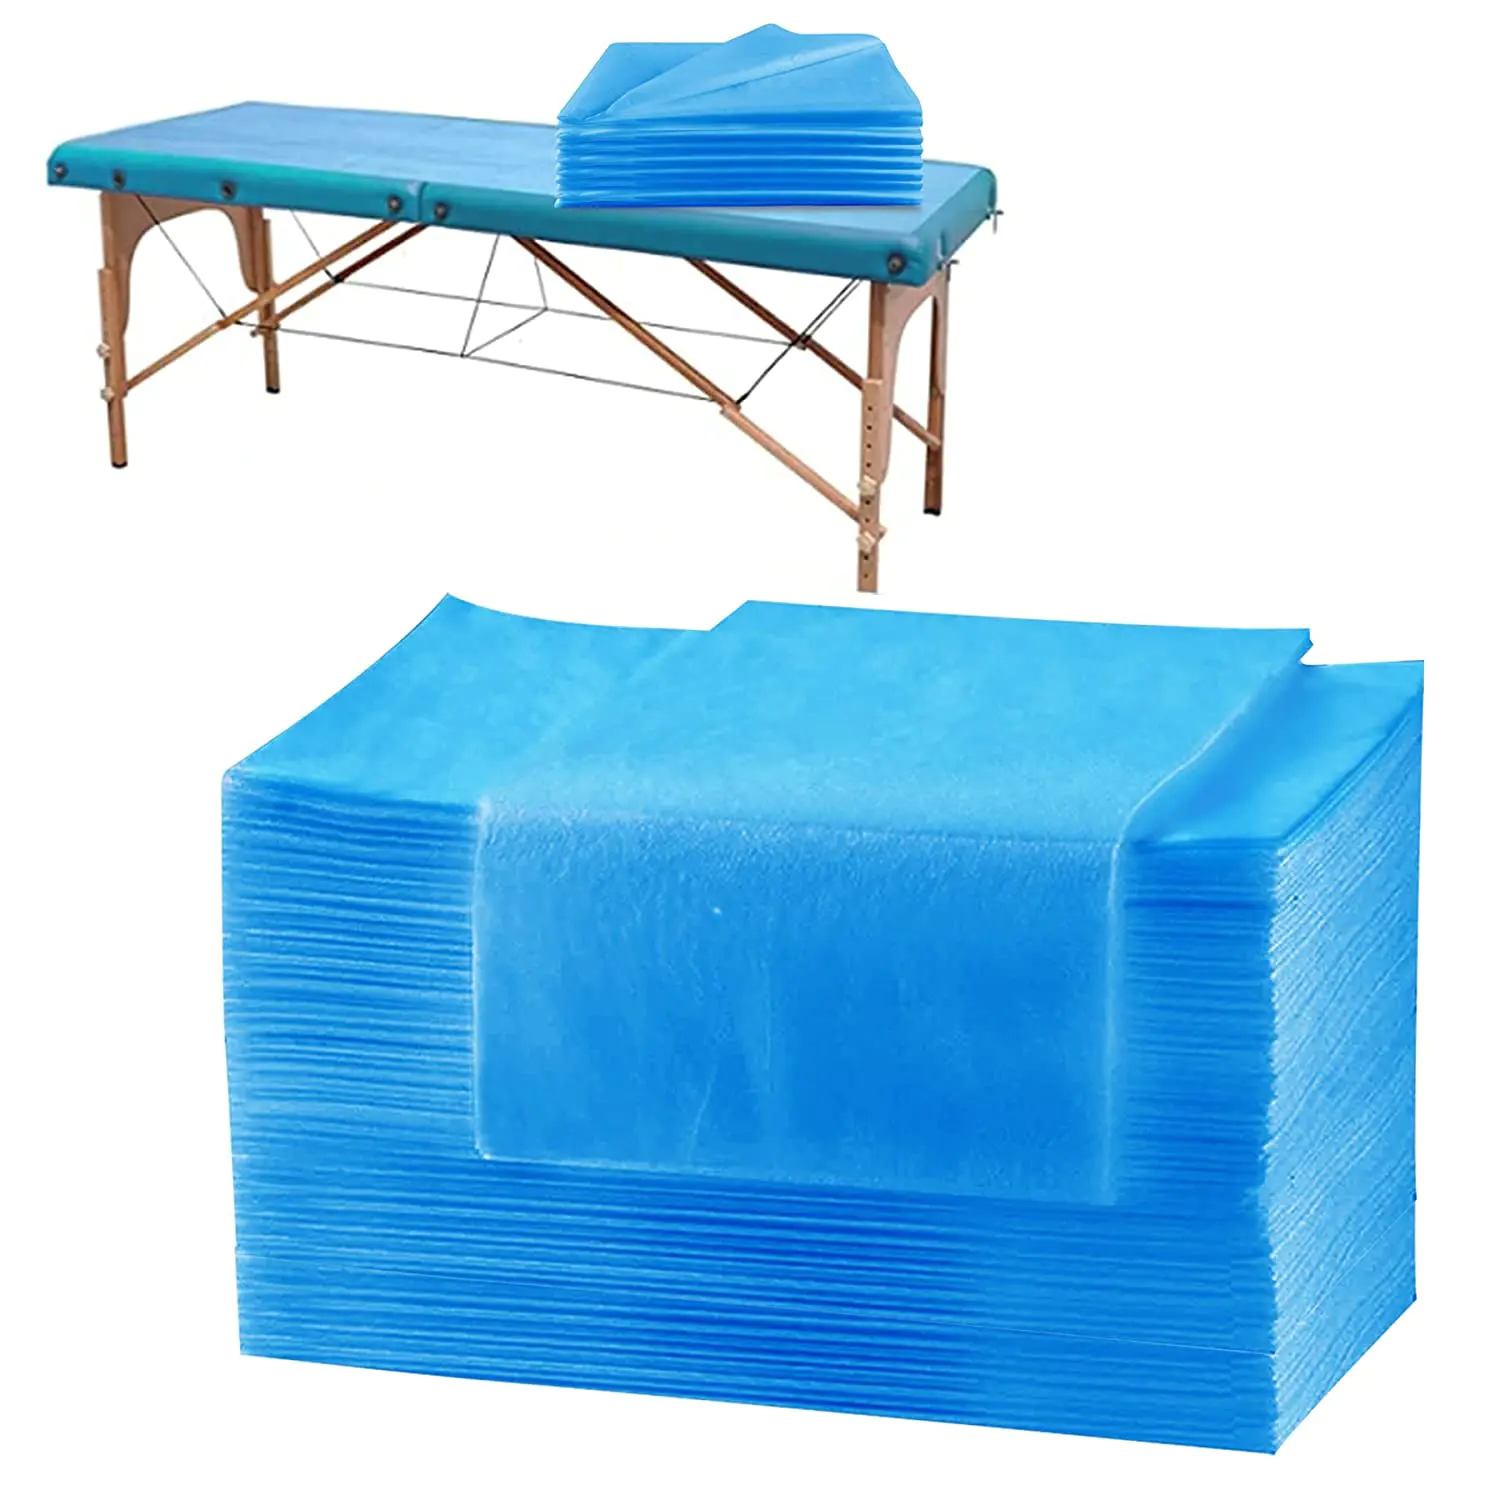 Cross-hole nonwoven fabric for beauty salons with disposable bed linen rolls